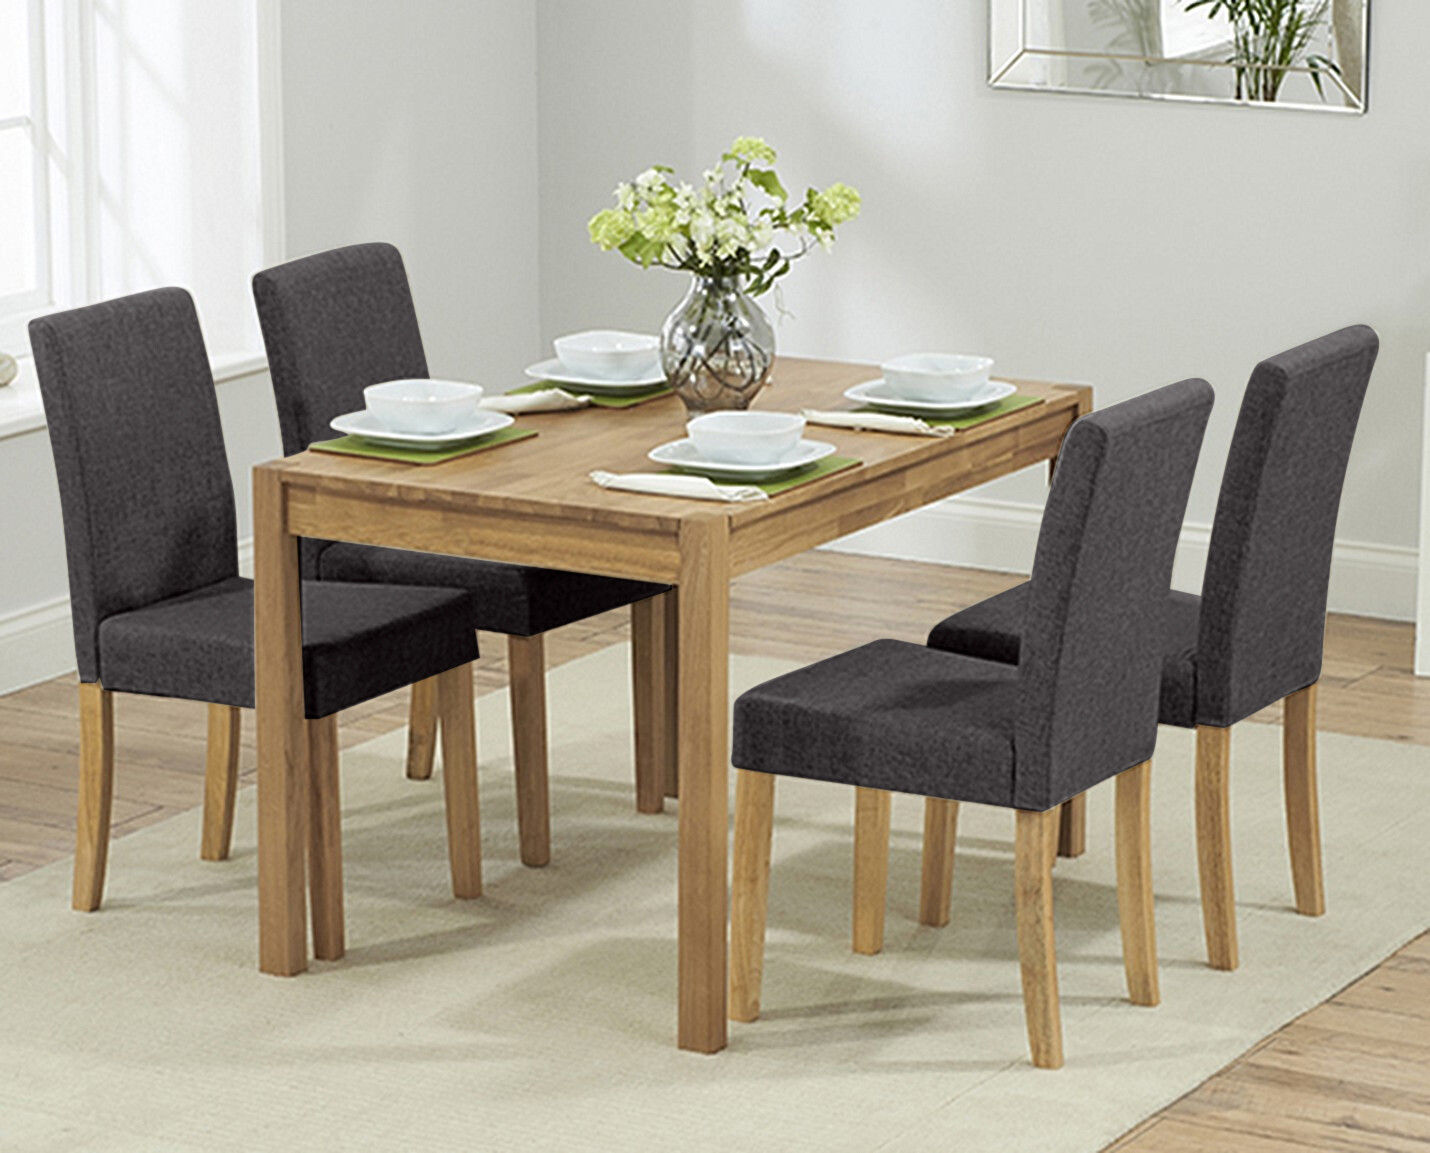 York 120cm Solid Oak Dining Table With 6 Charcoal Grey Lila Fabric Chairs